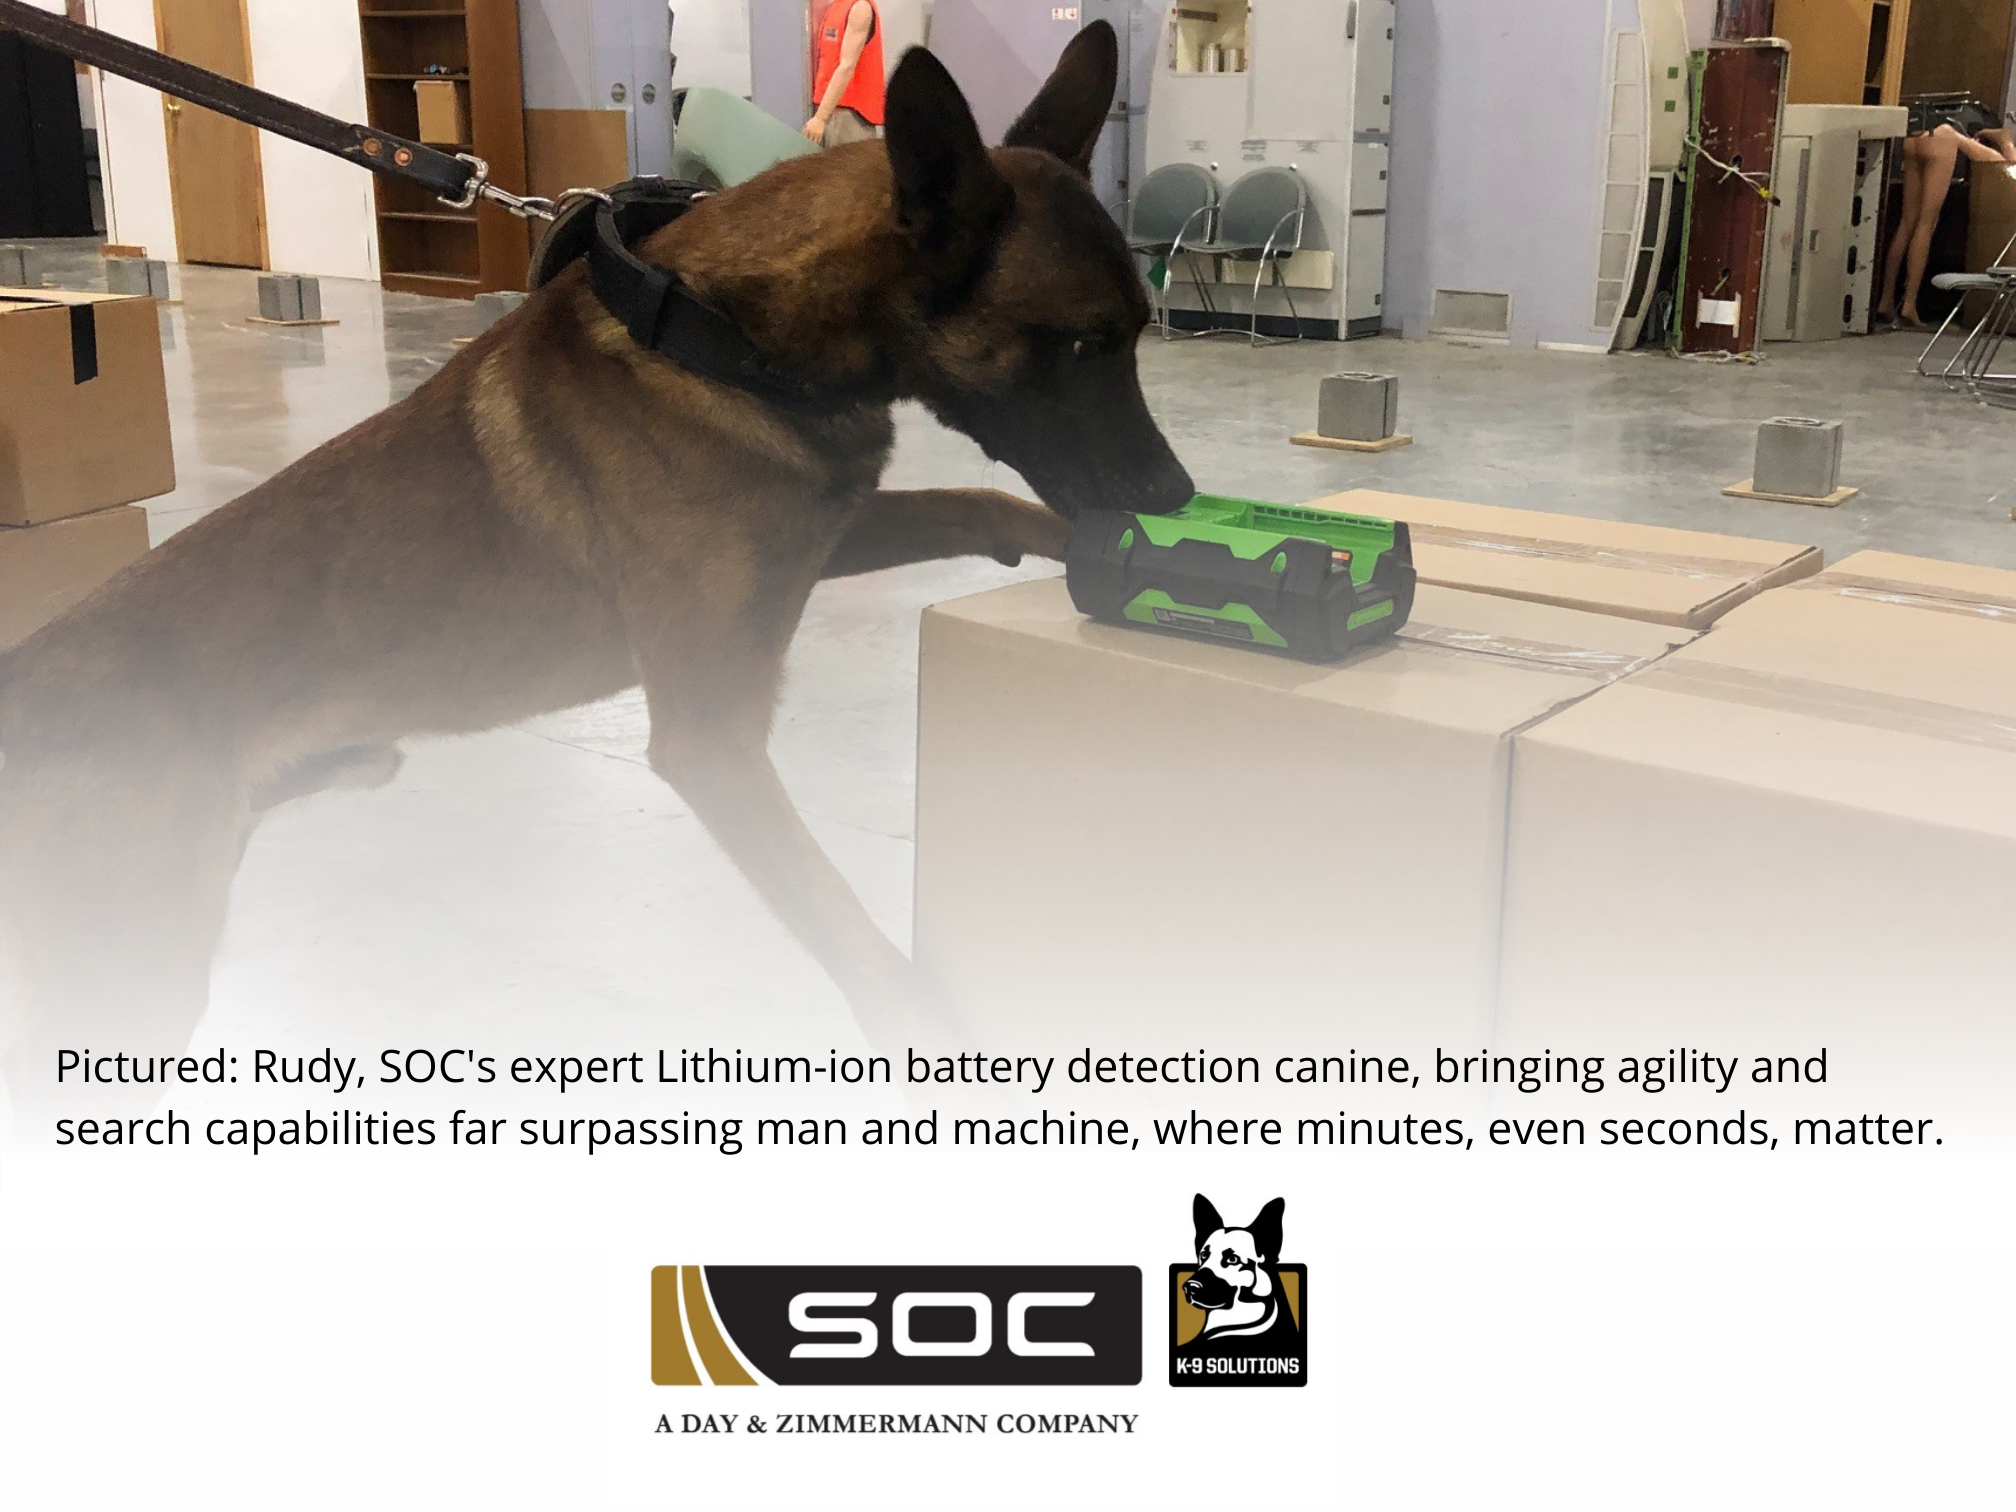 In The News: Canines: The Best Answer to the Safety and Financial Concerns that Lithium-ion Batteries Present